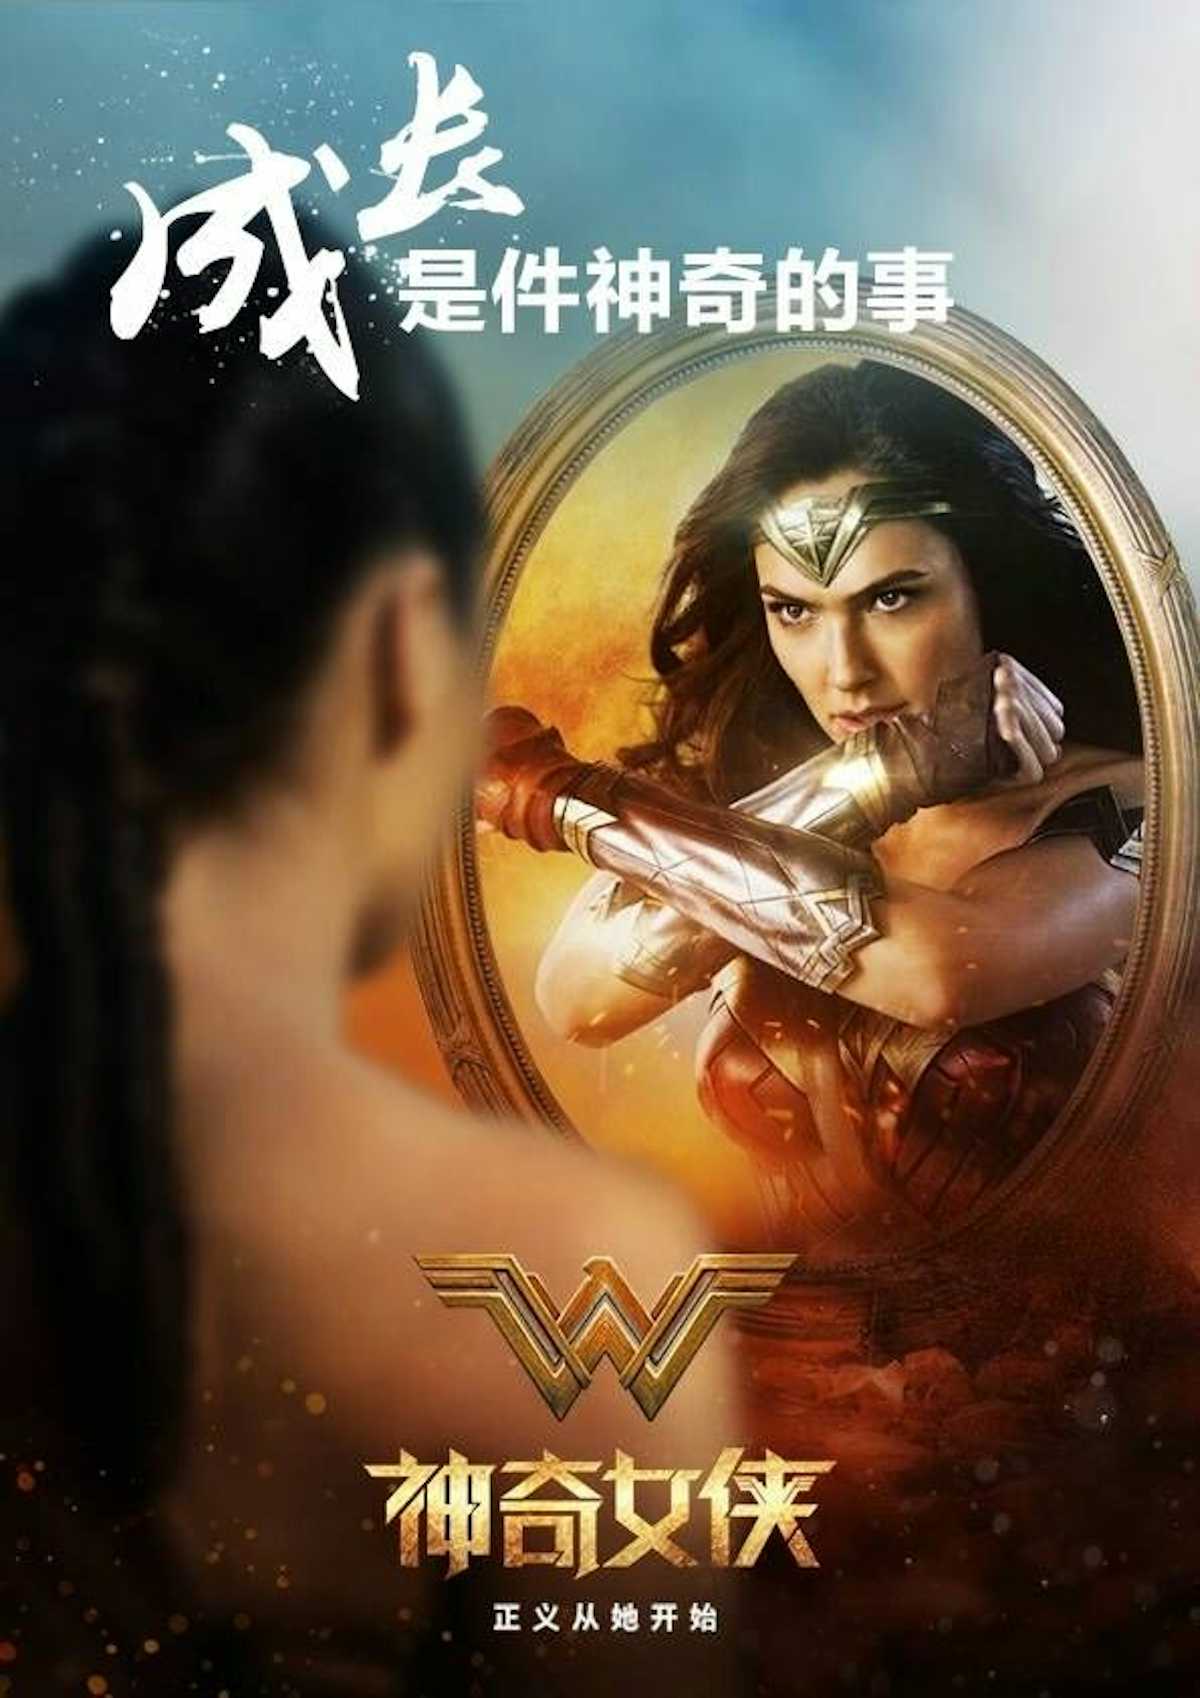 Selling Sex Wonder Woman And The Ancient Fantasy Of Hot Lady Warriors